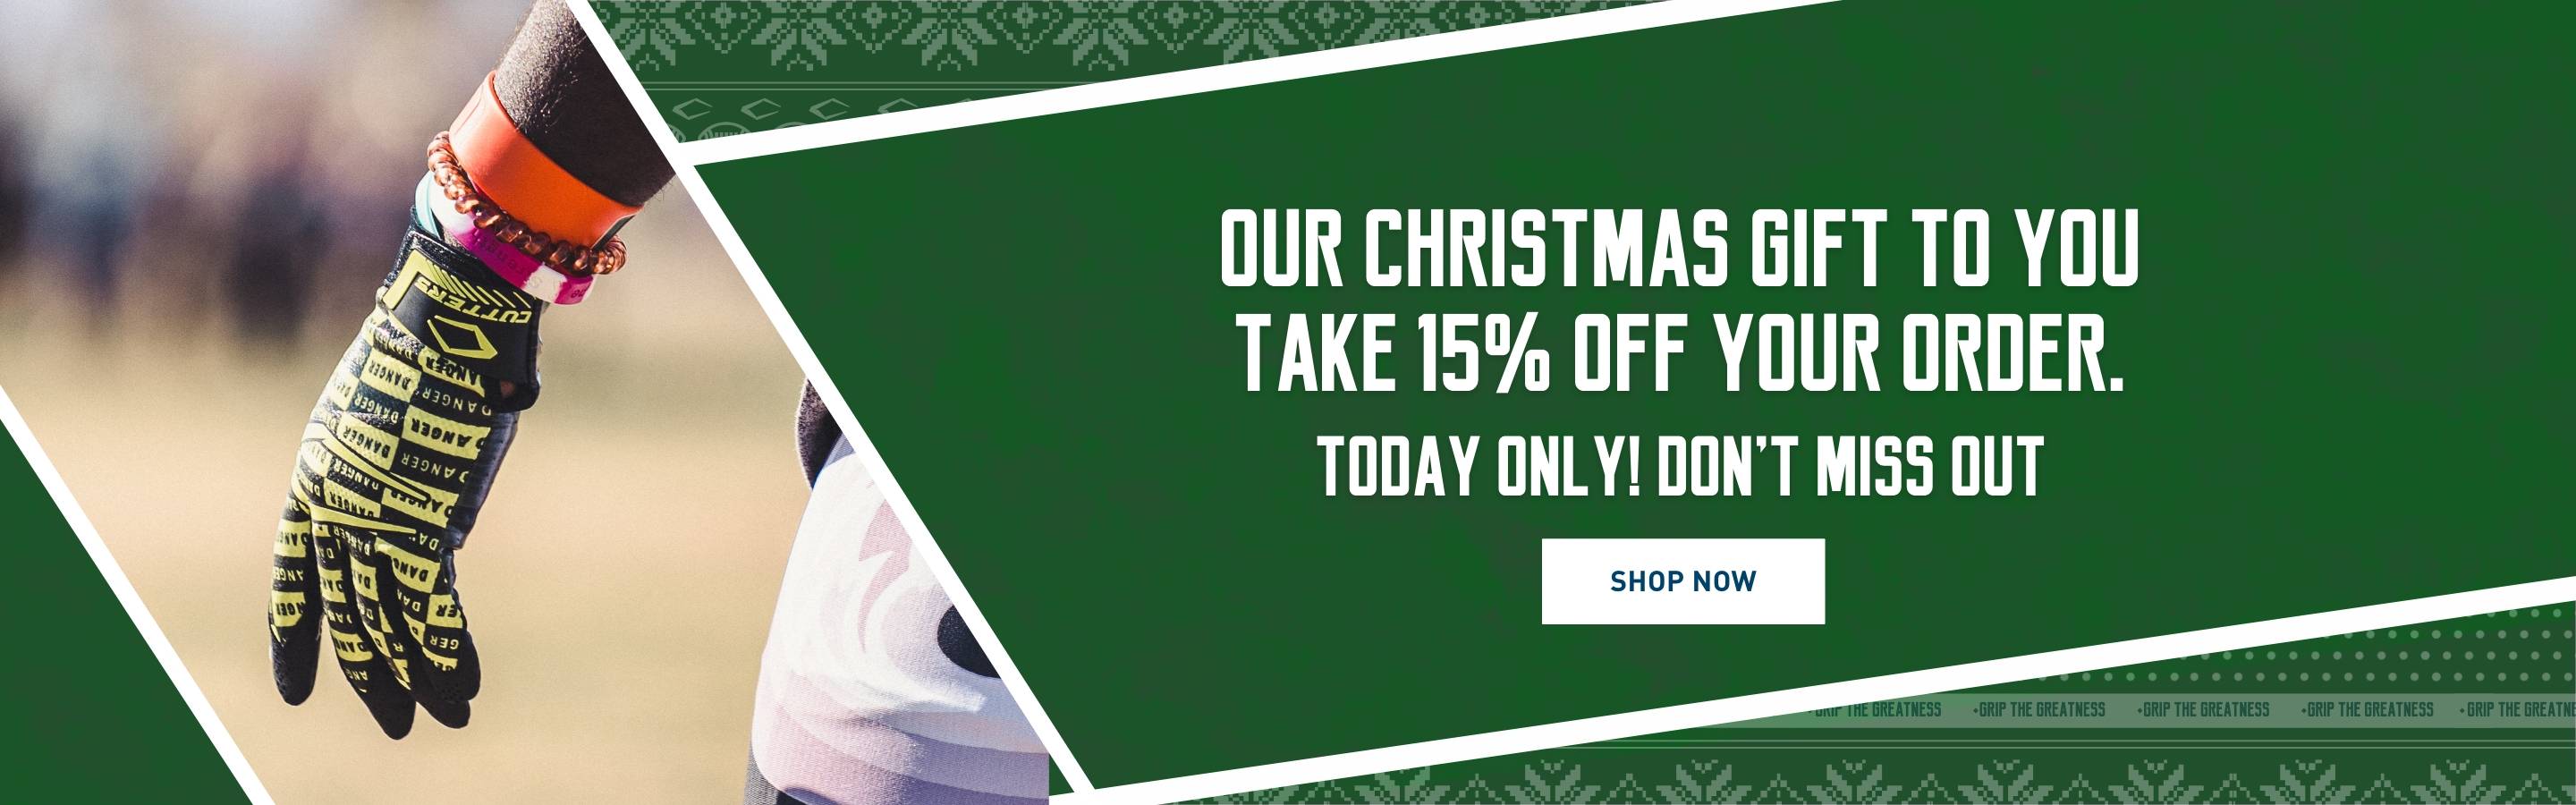 Our Christmas Gift to You Take 15% Off Your Order. Today Only! Don't Miss Out Shop Now